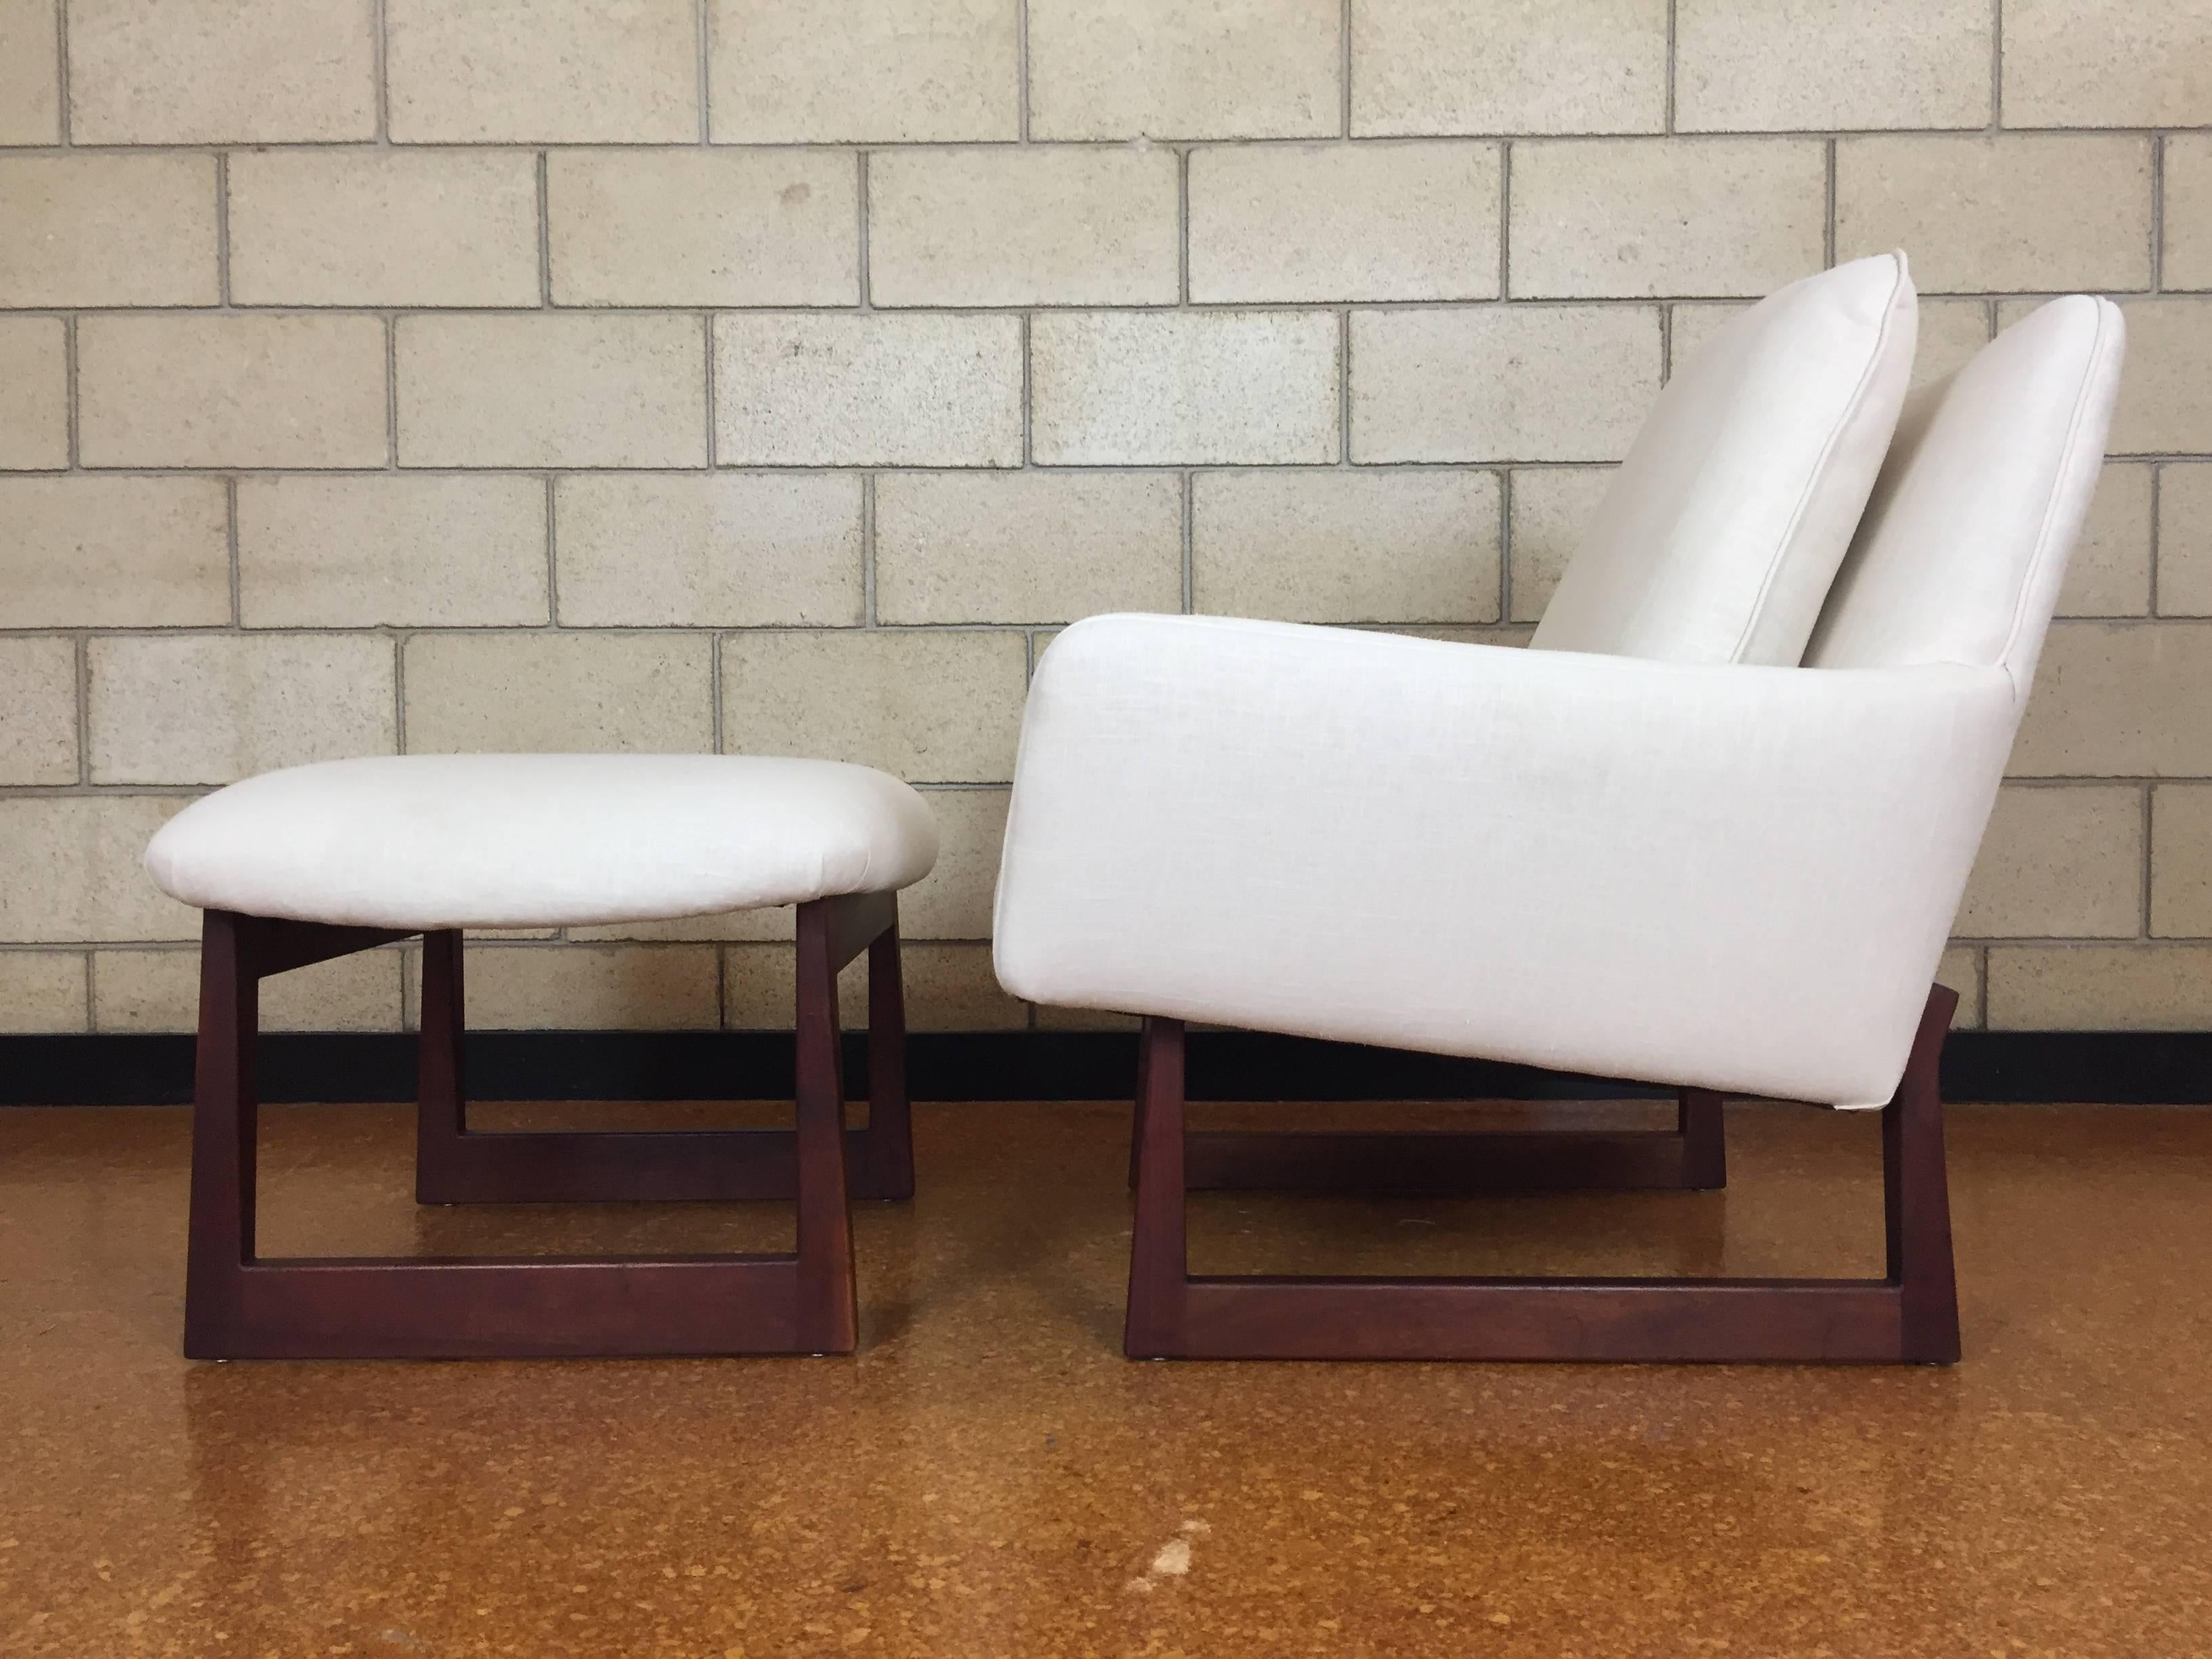 American Stunning Jens Risom Lounge Chair and Ottoman Reupholstered in Cream Linen